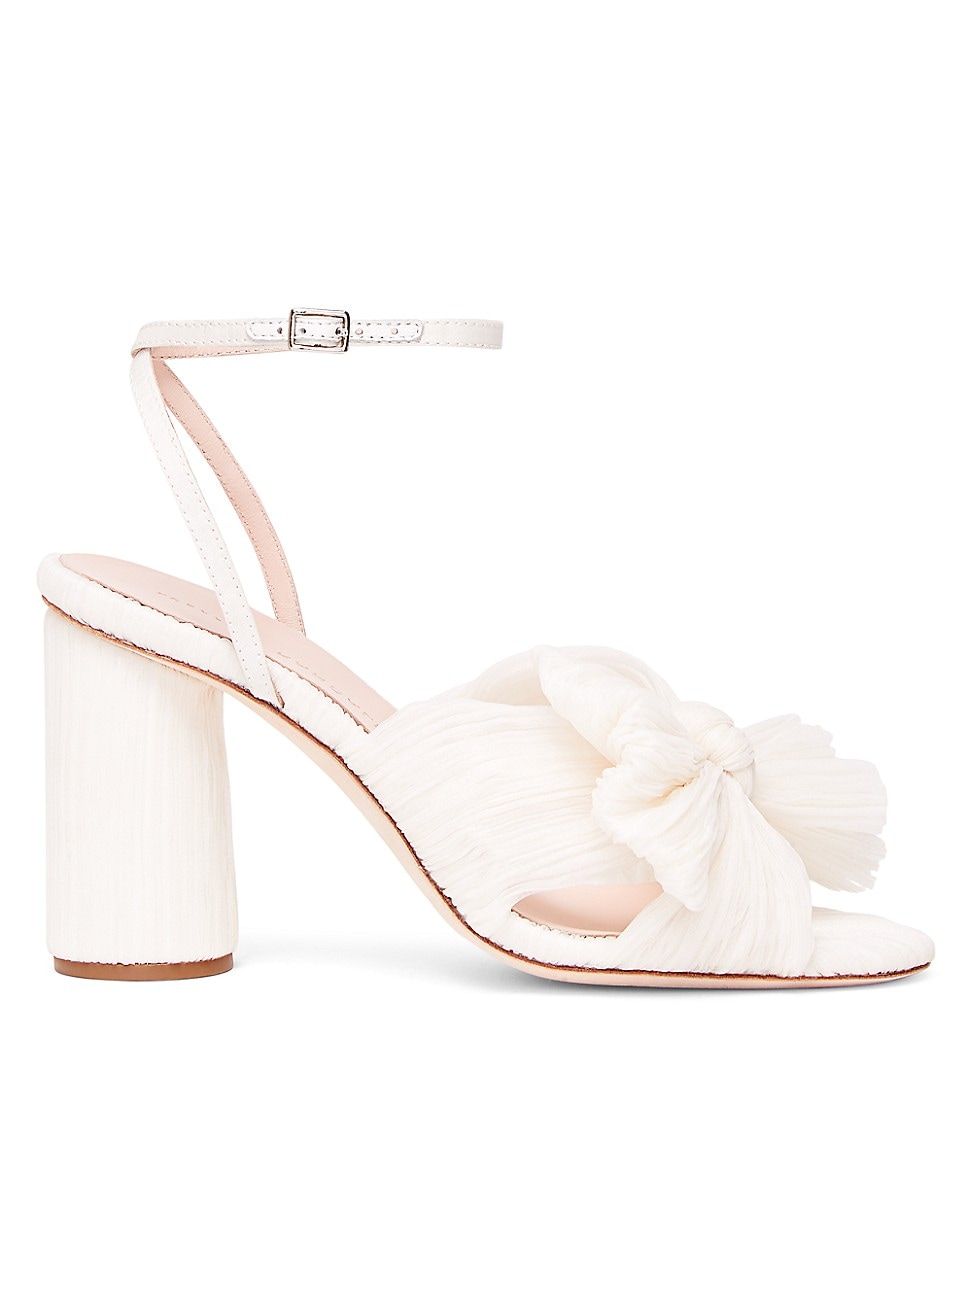 Loeffler Randall Women's Camellia Knotted Sandals - Pearl - Size 11 | Saks Fifth Avenue